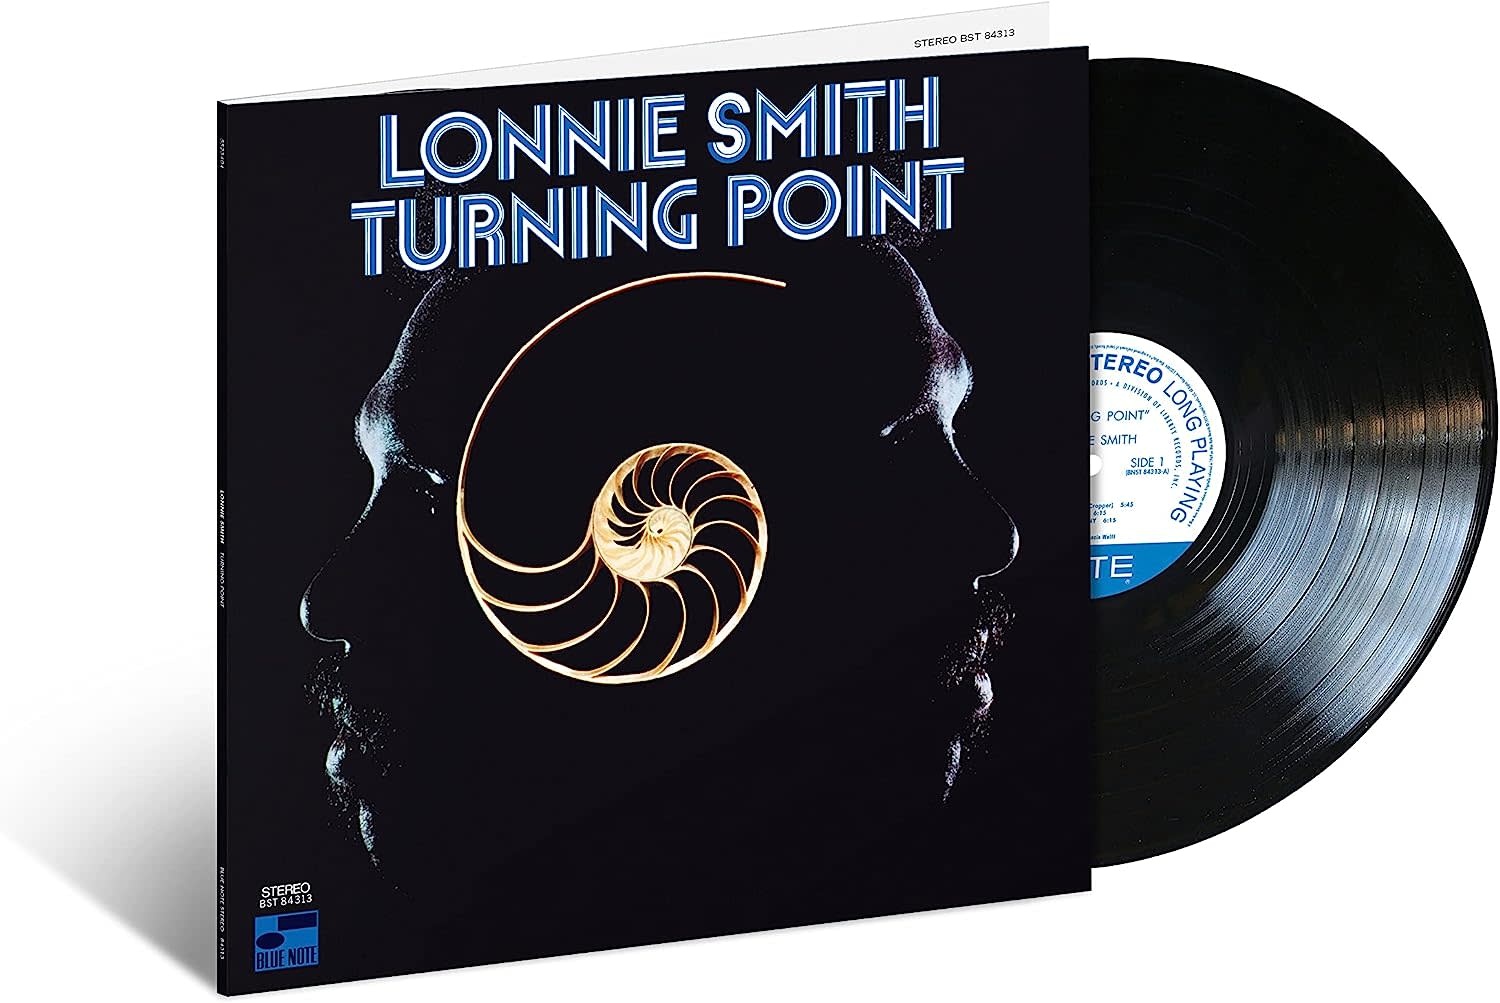 Lonnie Smith – Turning Point